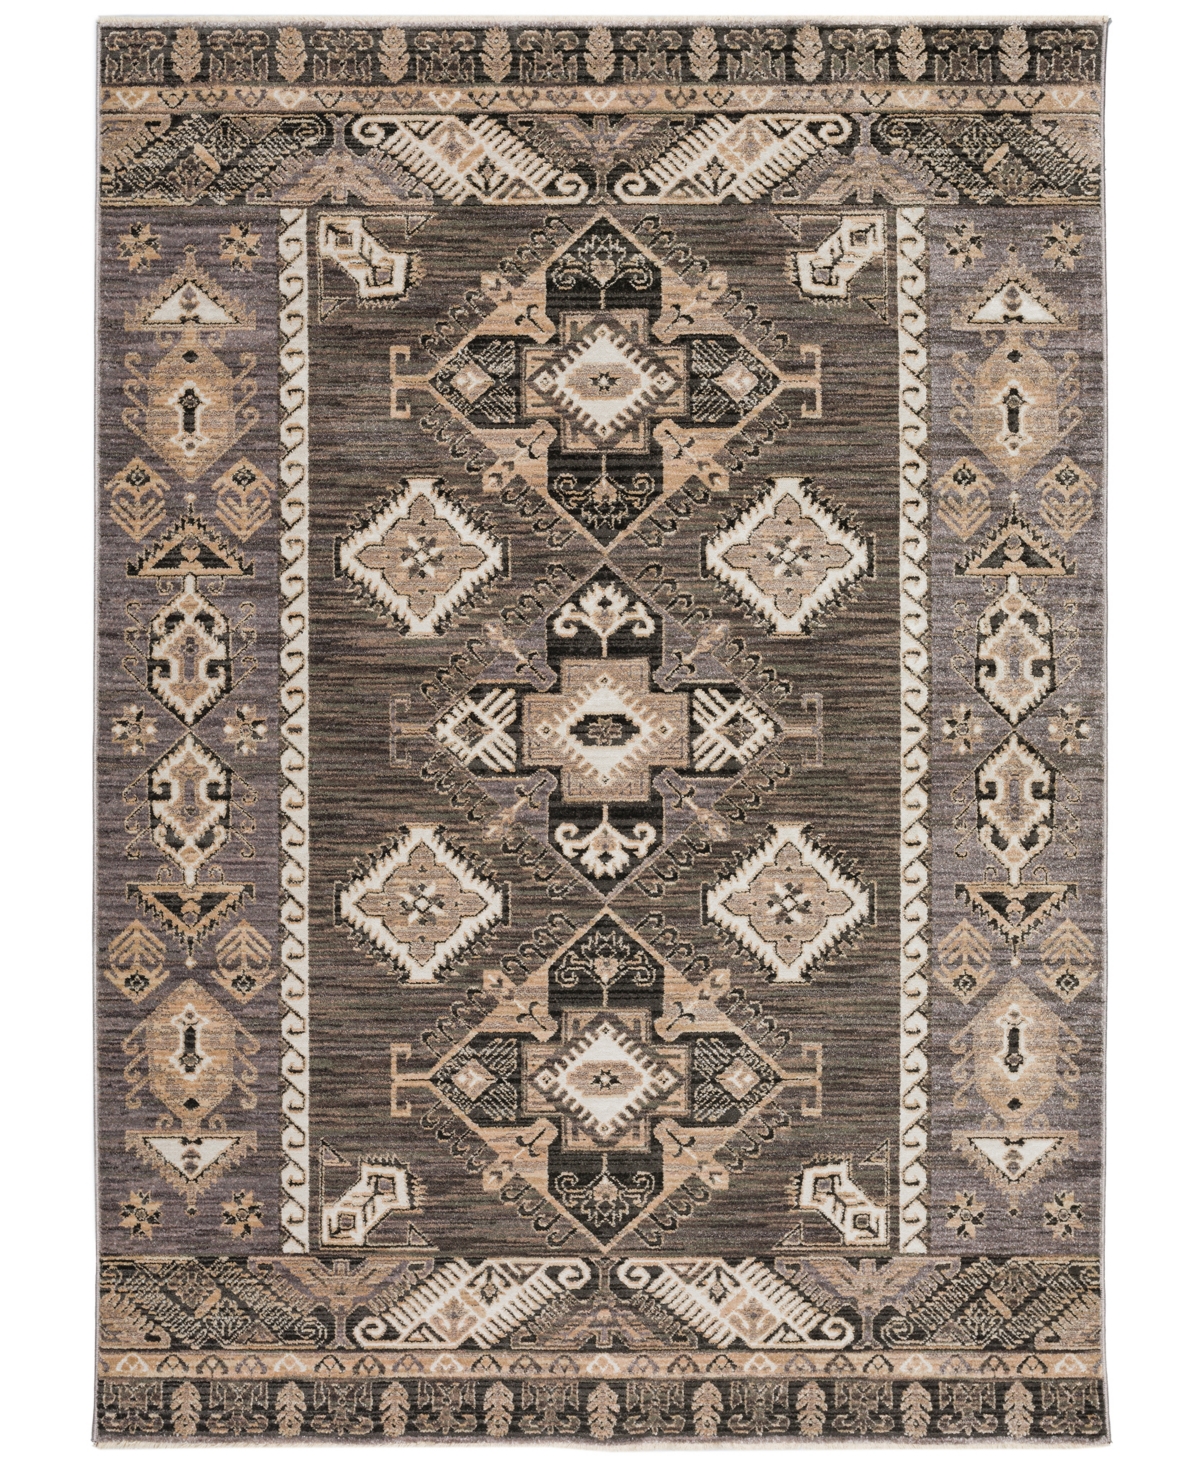 D Style Sergey Sgy10 9' X 12'6" Area Rug In Gray